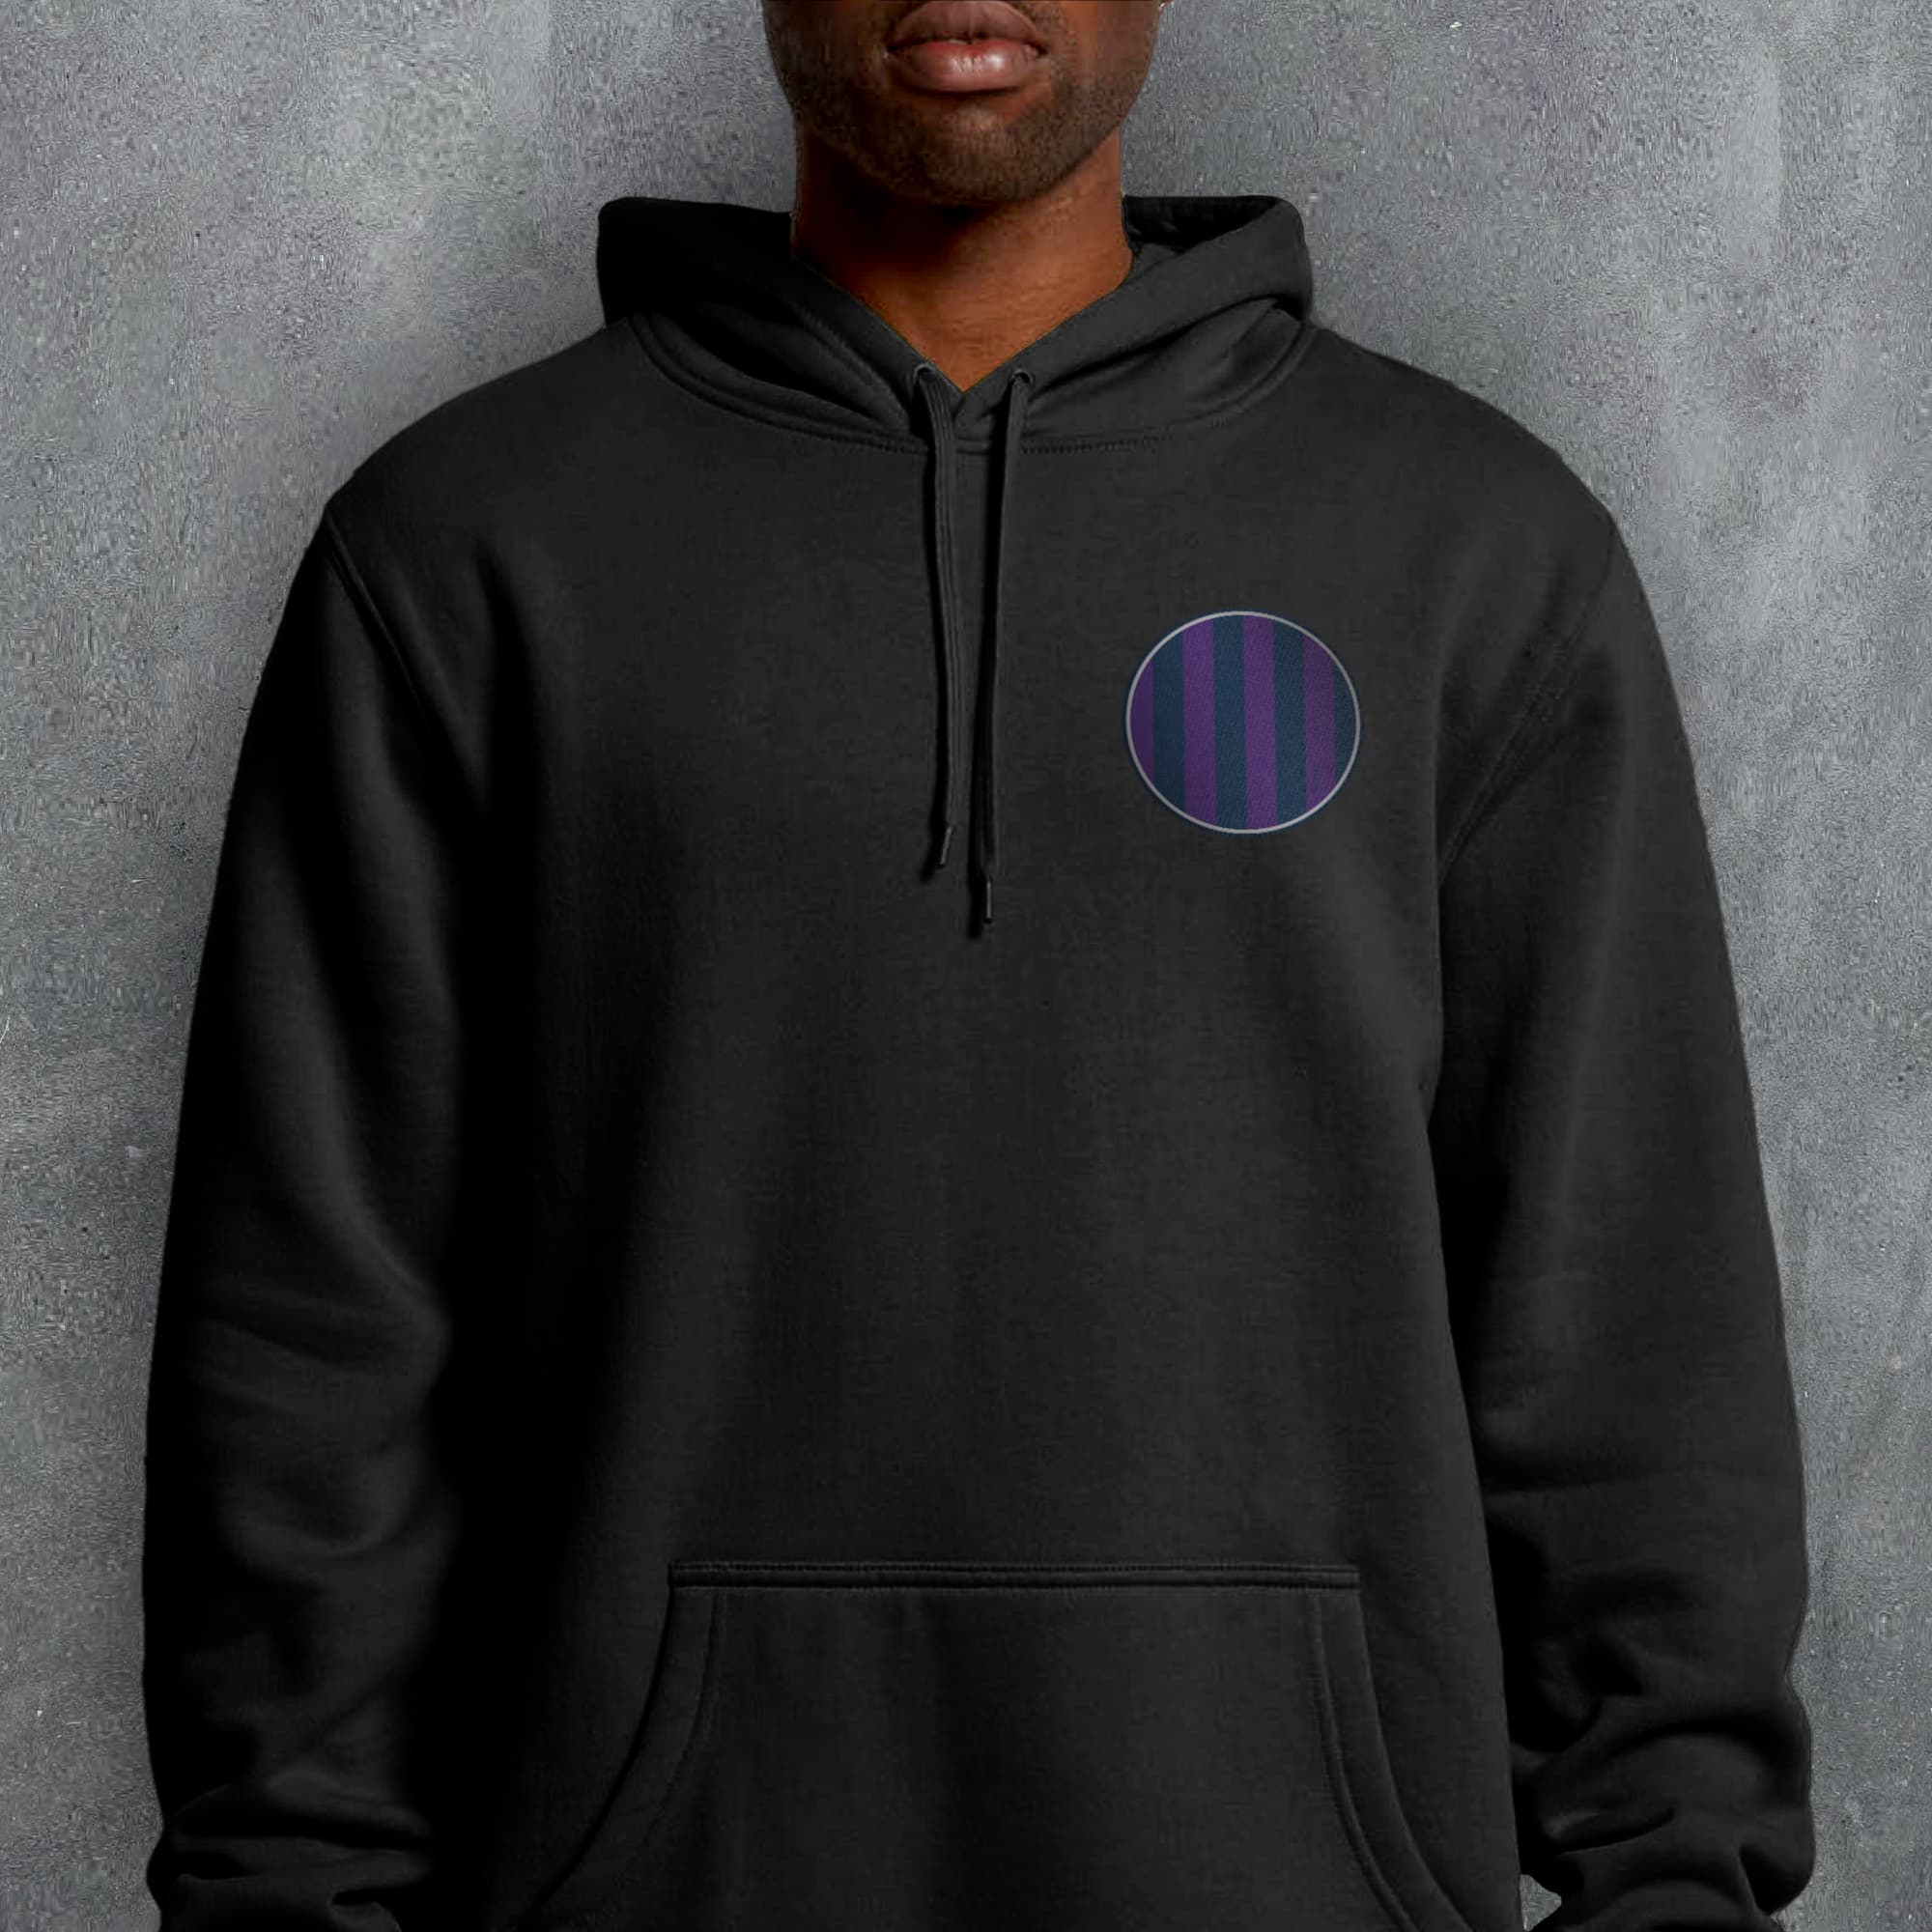 a man wearing a black hoodie with a purple circle on it